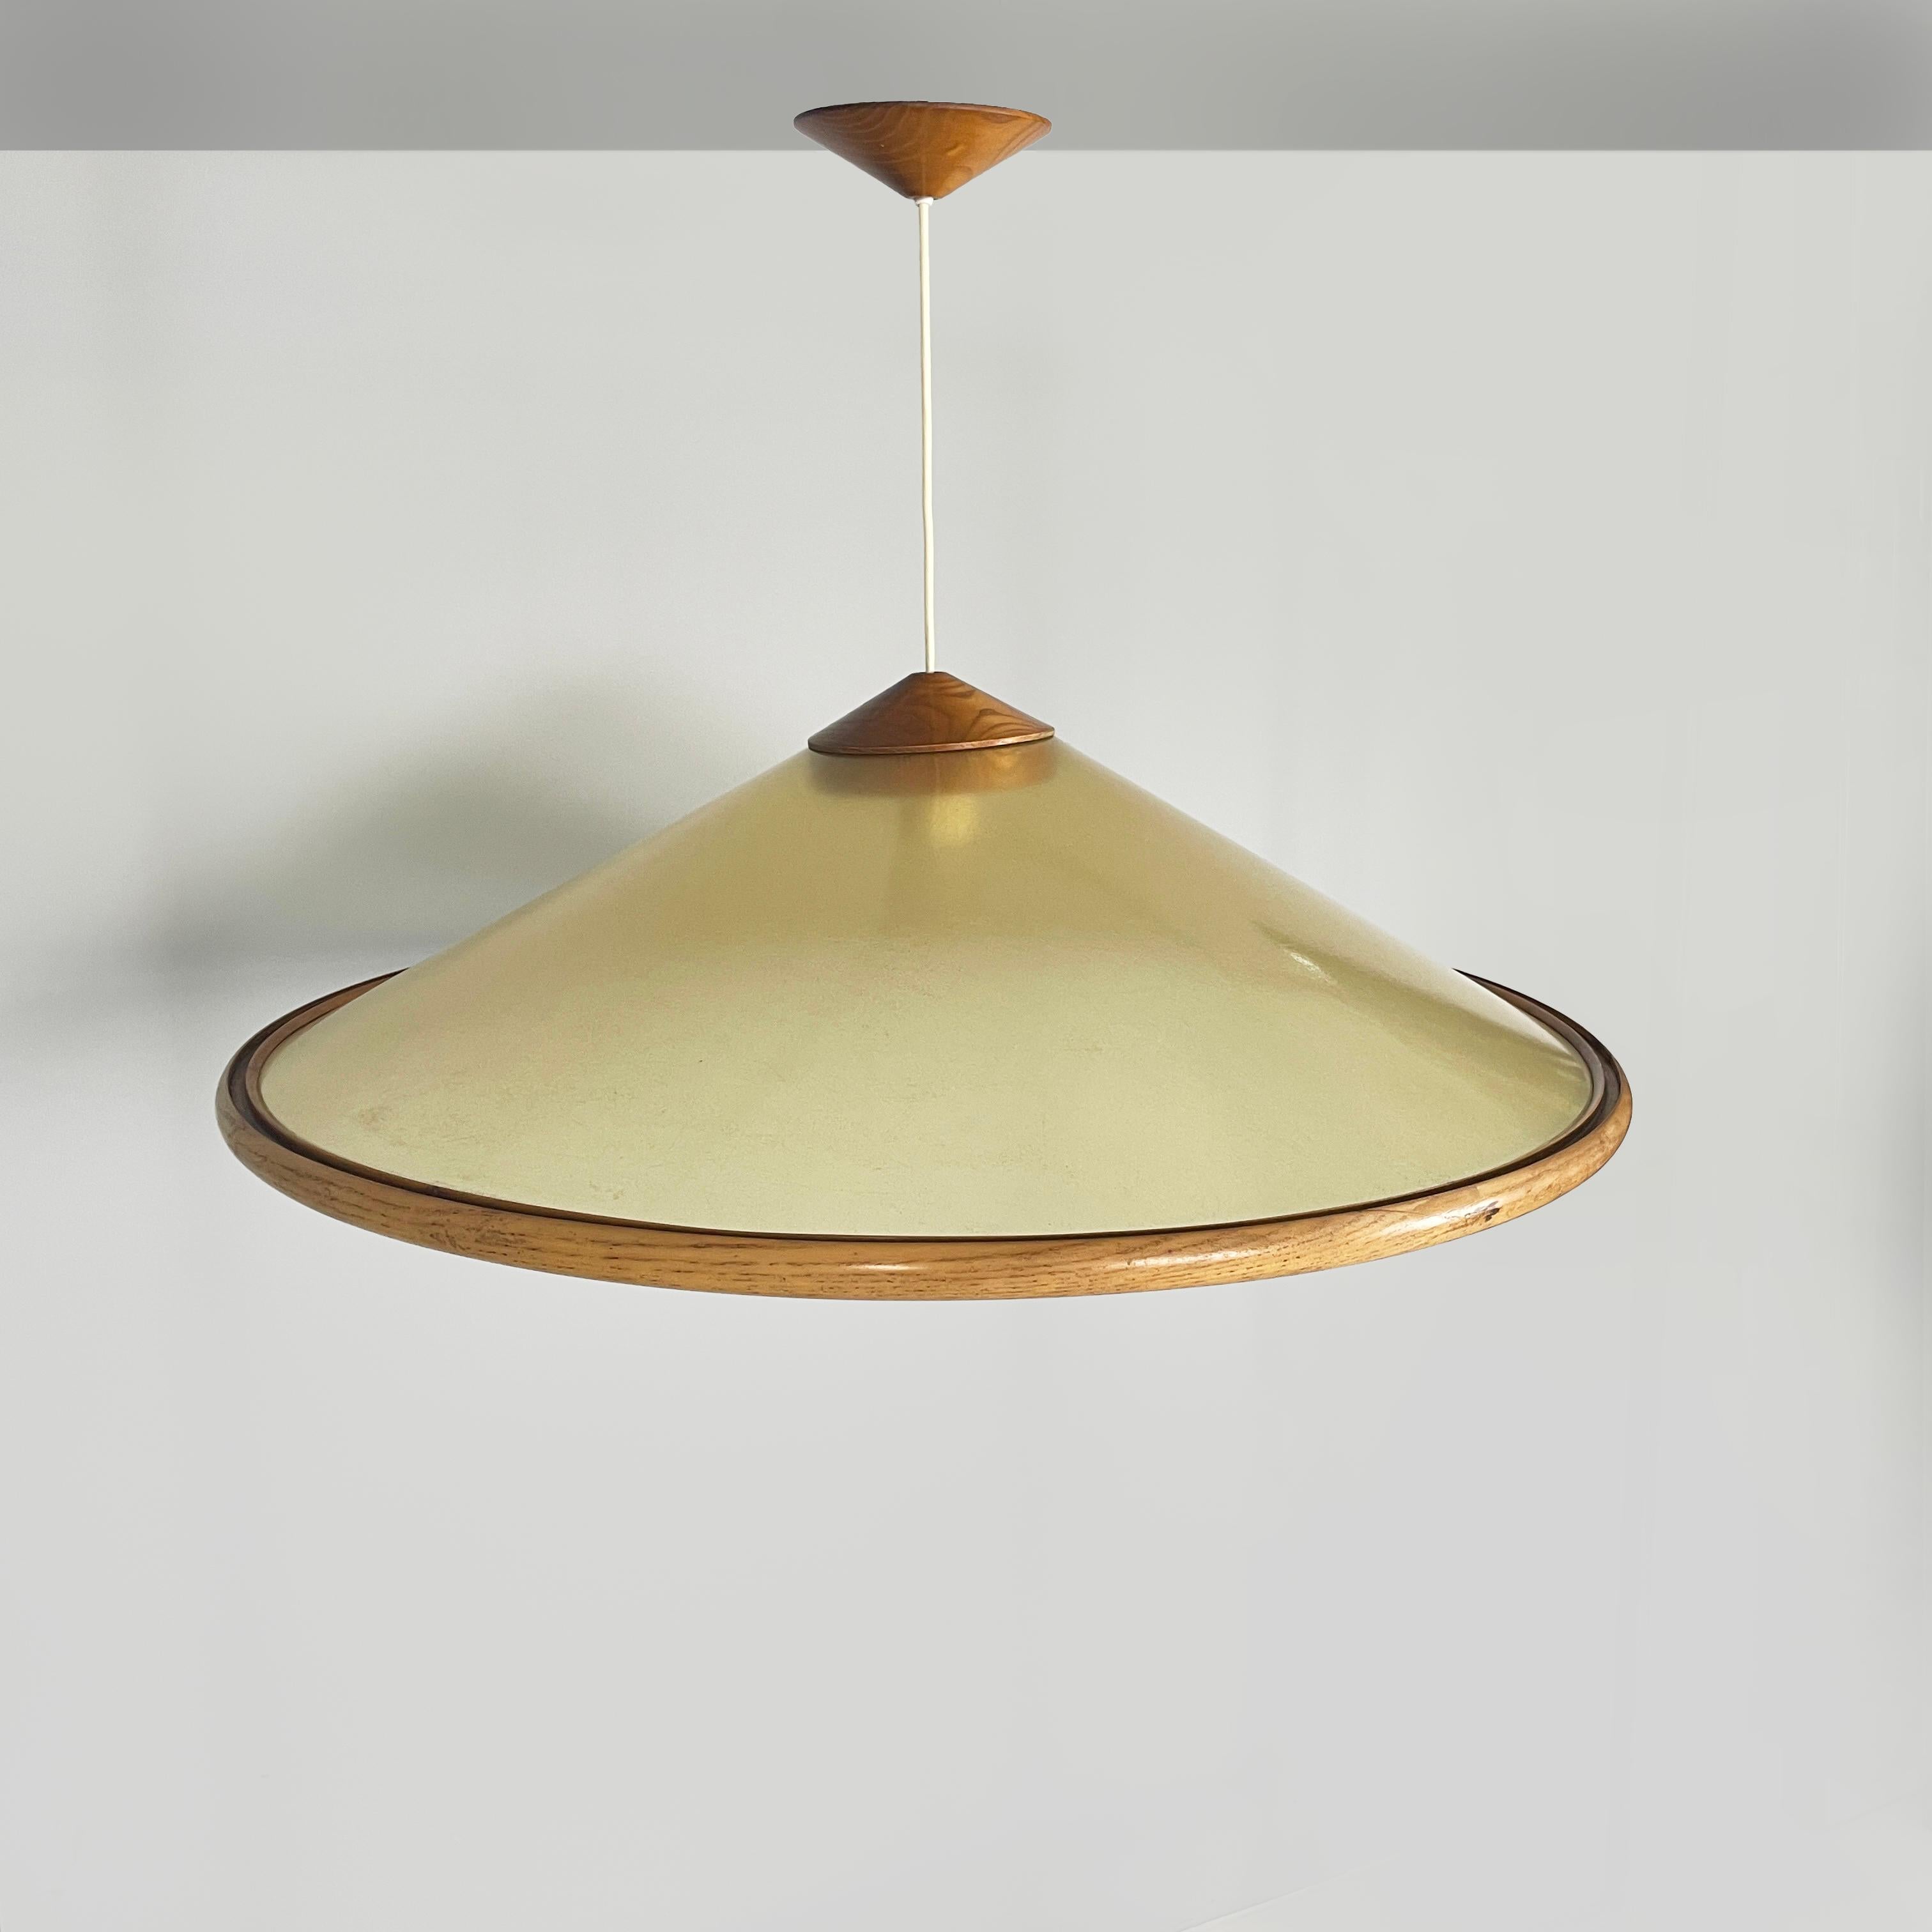 Italian modern Conical chandelier in green fiberglass and wood, 1980s
Fantastic and vintage round base chandelier in sage green fiberglass and wood. The conical lampshade is made of semi-transparent green fiberglass. The profile is made of wood with